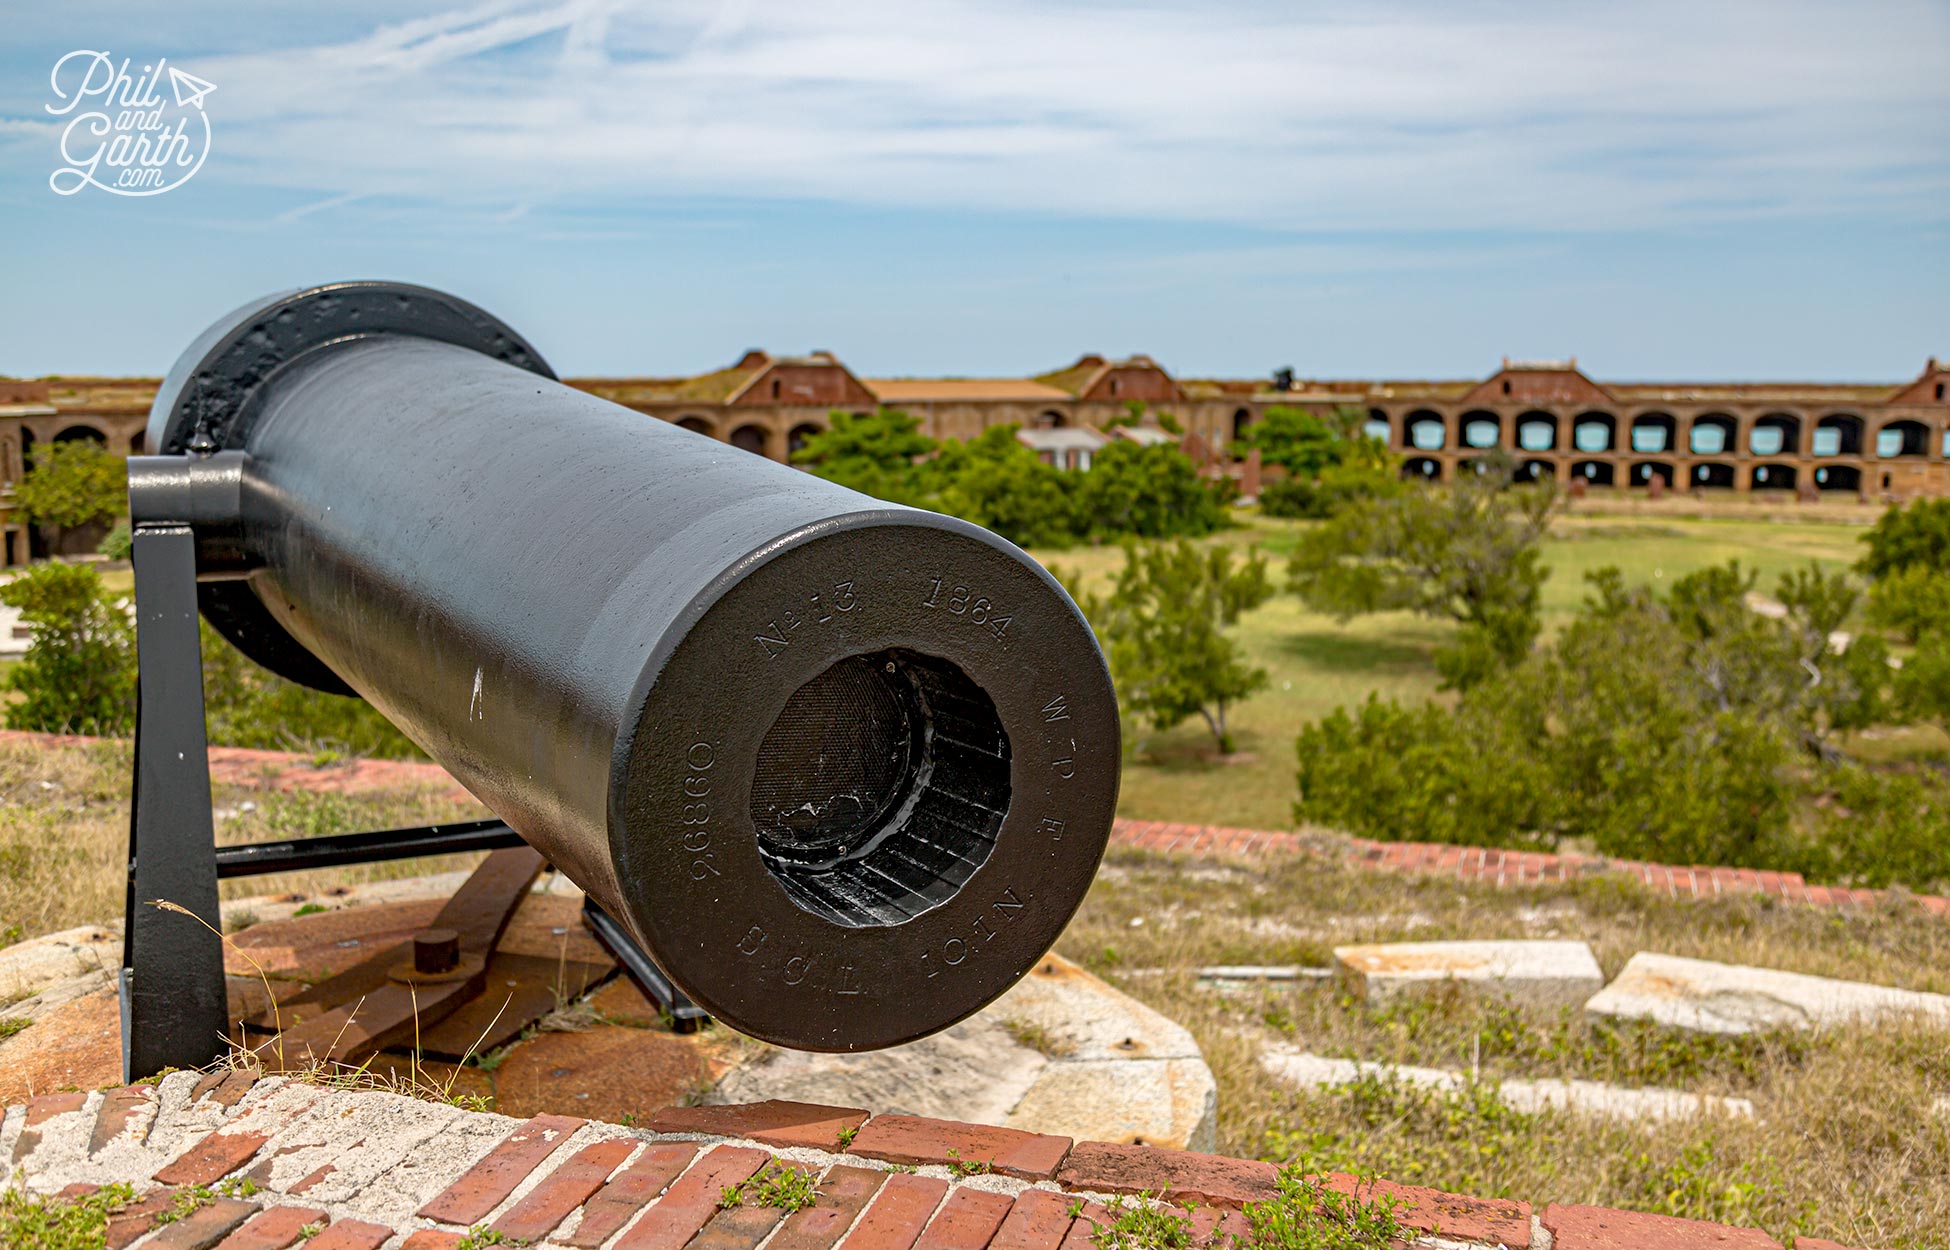 Look inside the barrel of the cannon for grooves which made projectiles spin for 3 miles